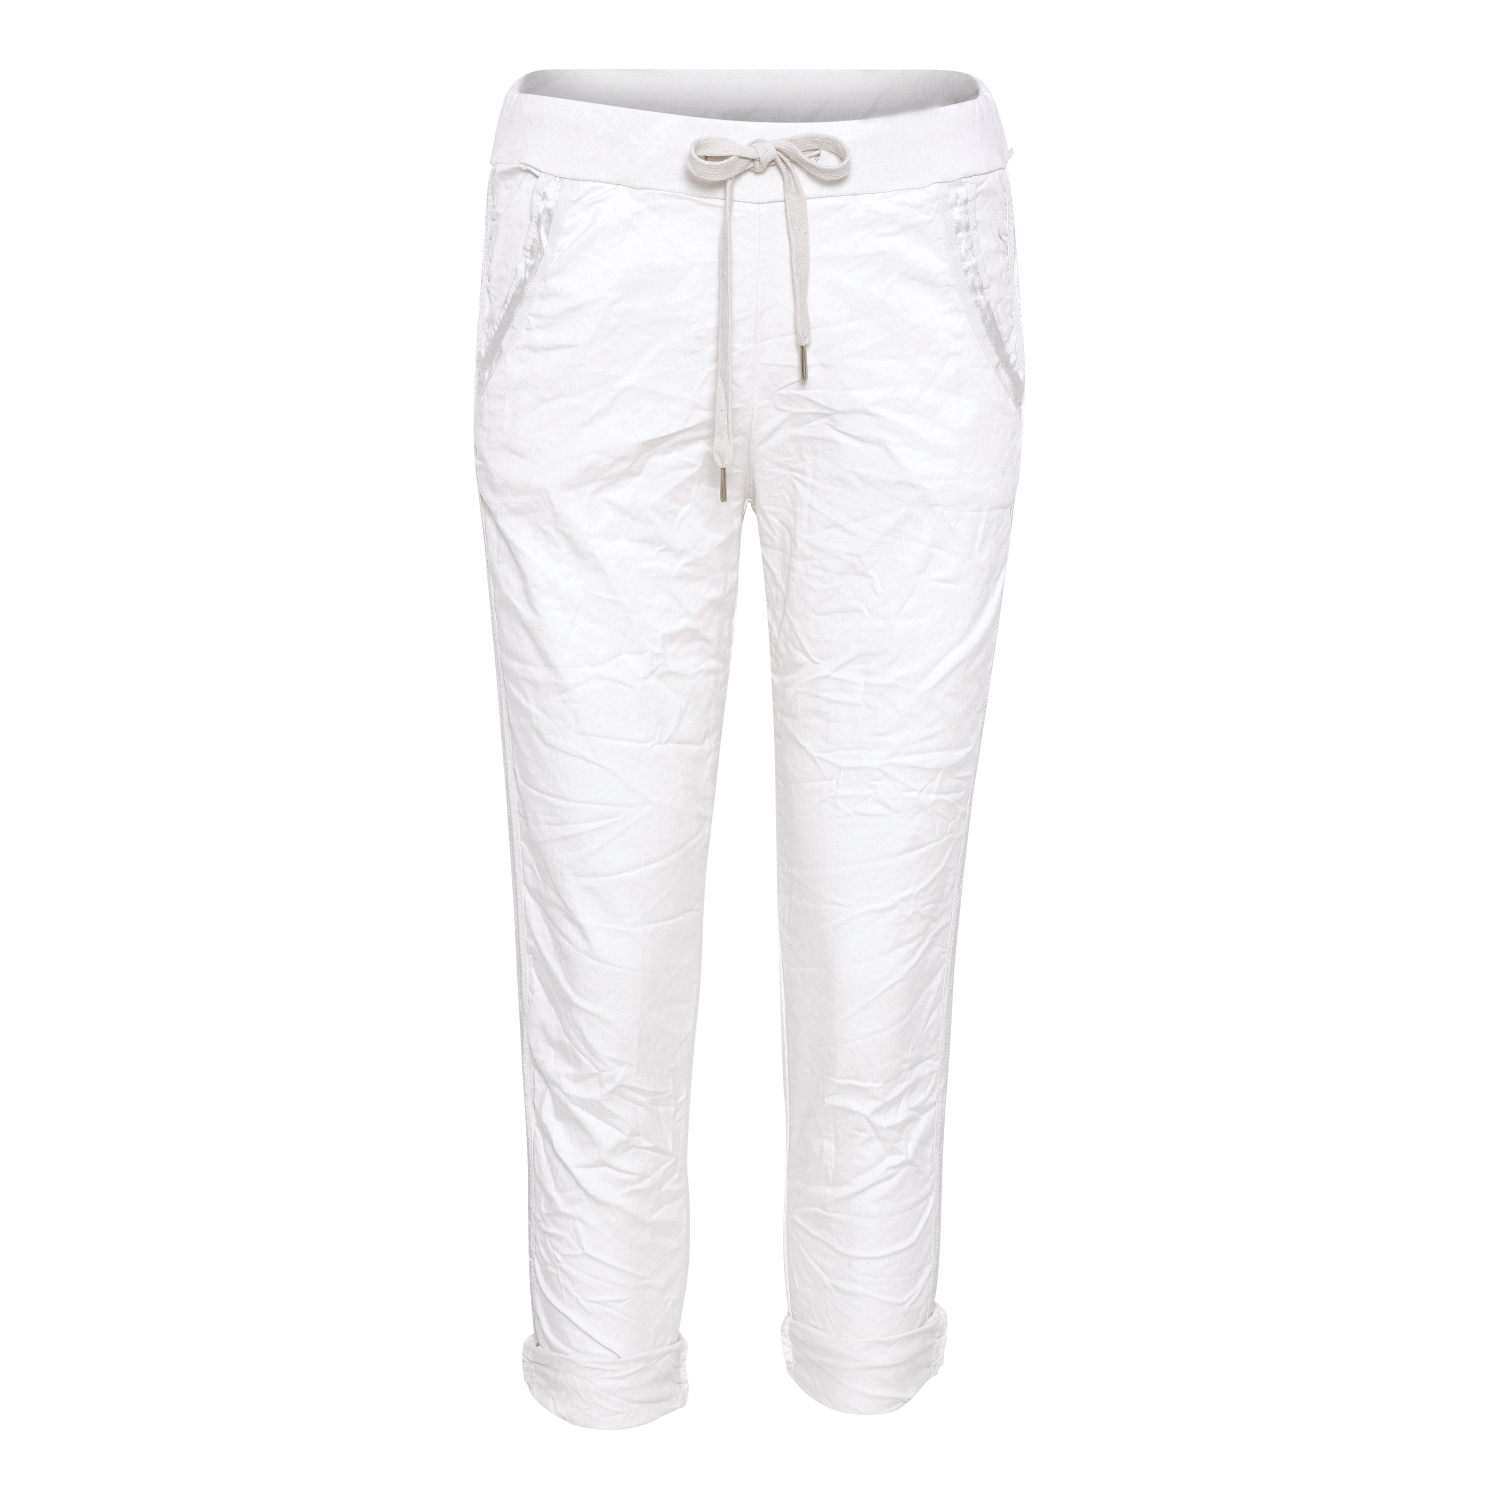 Relax Pants - White